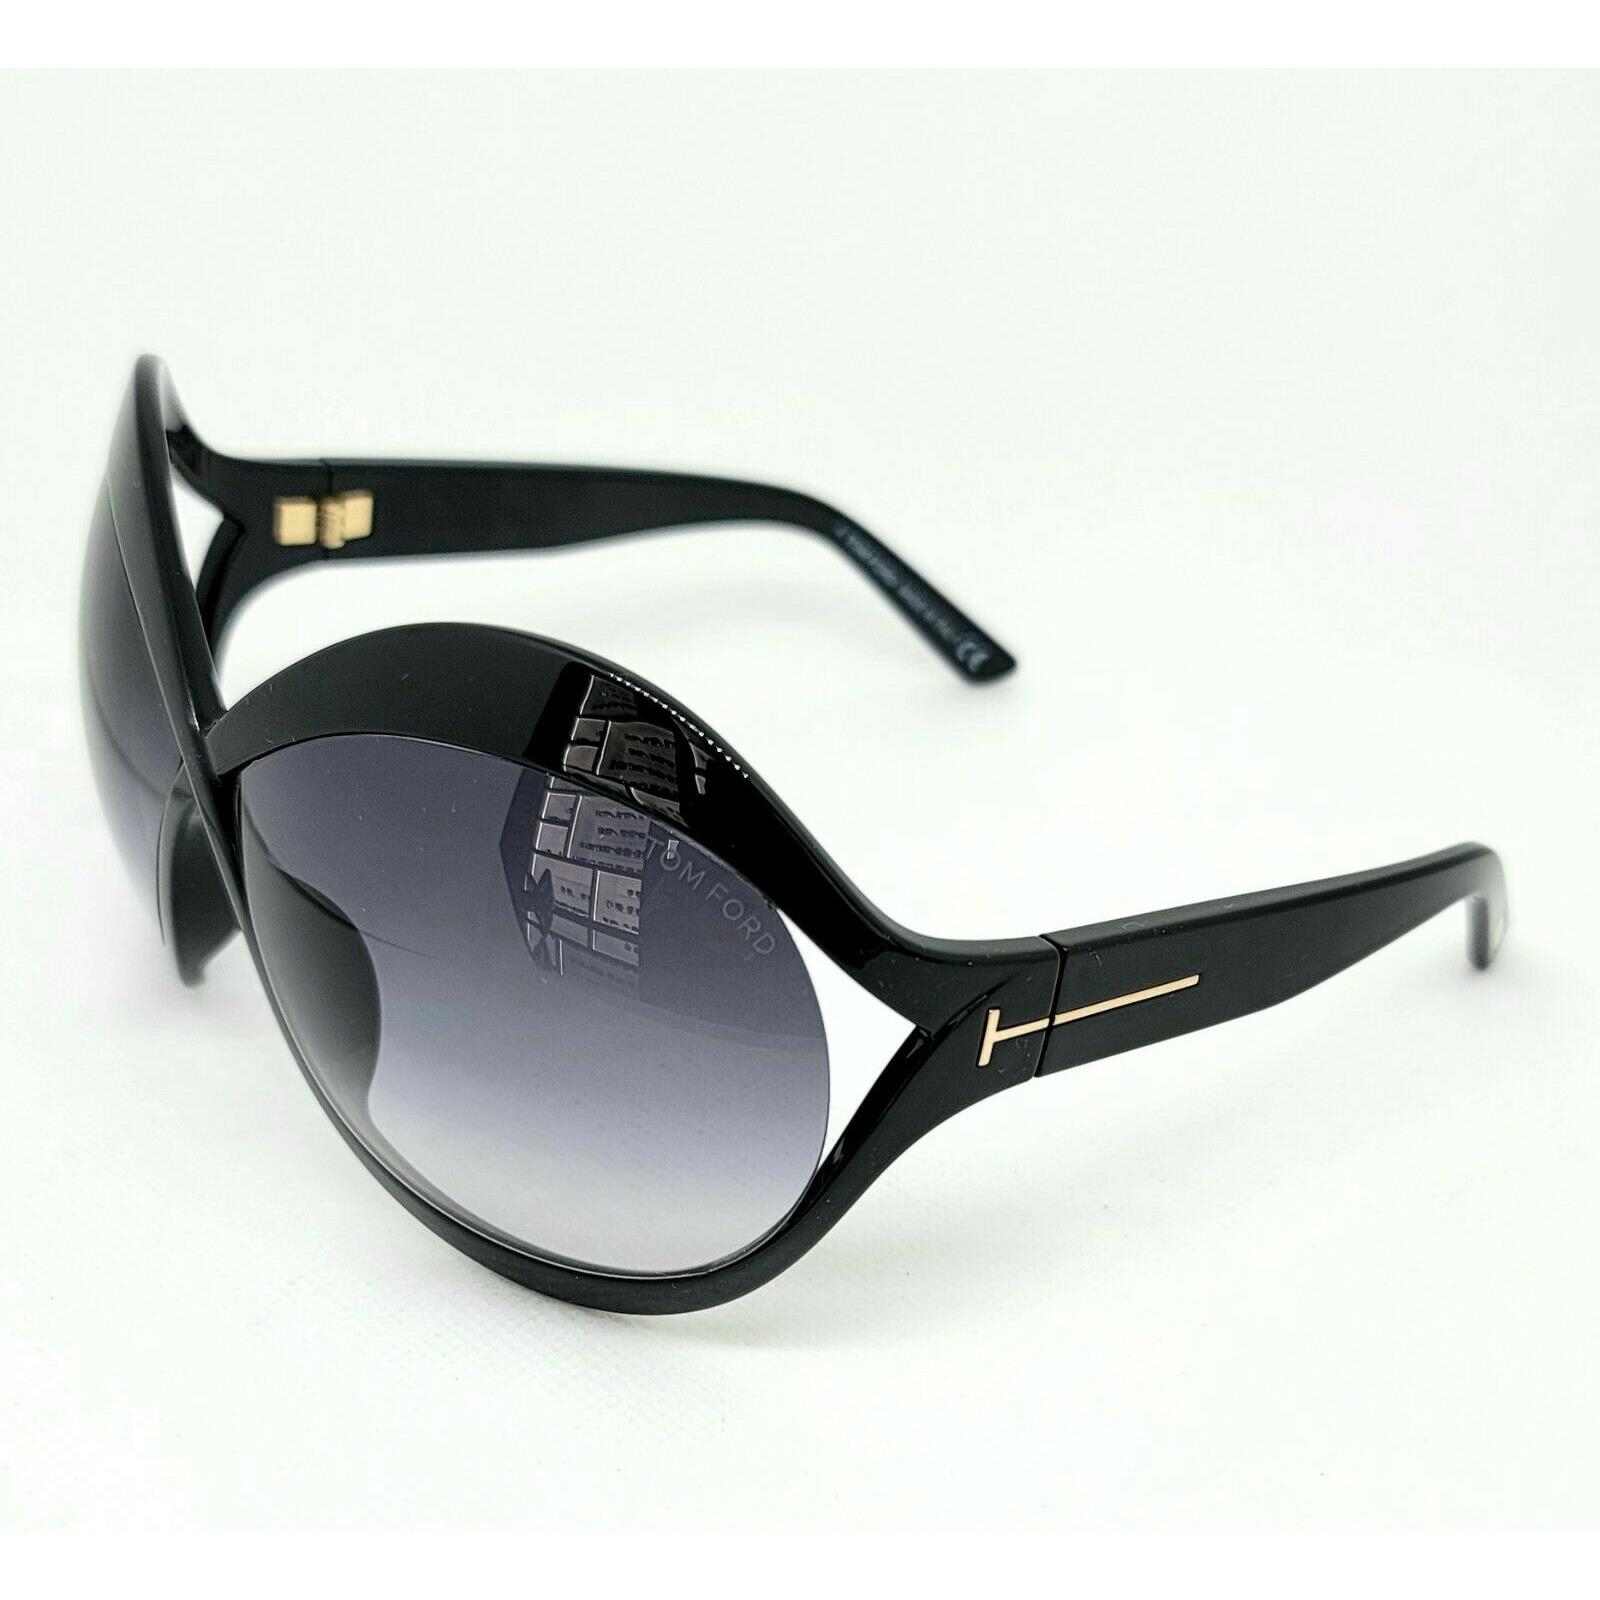 TOM FORD SUNGLASSES   TF902    BEST PRICE ON THE NET